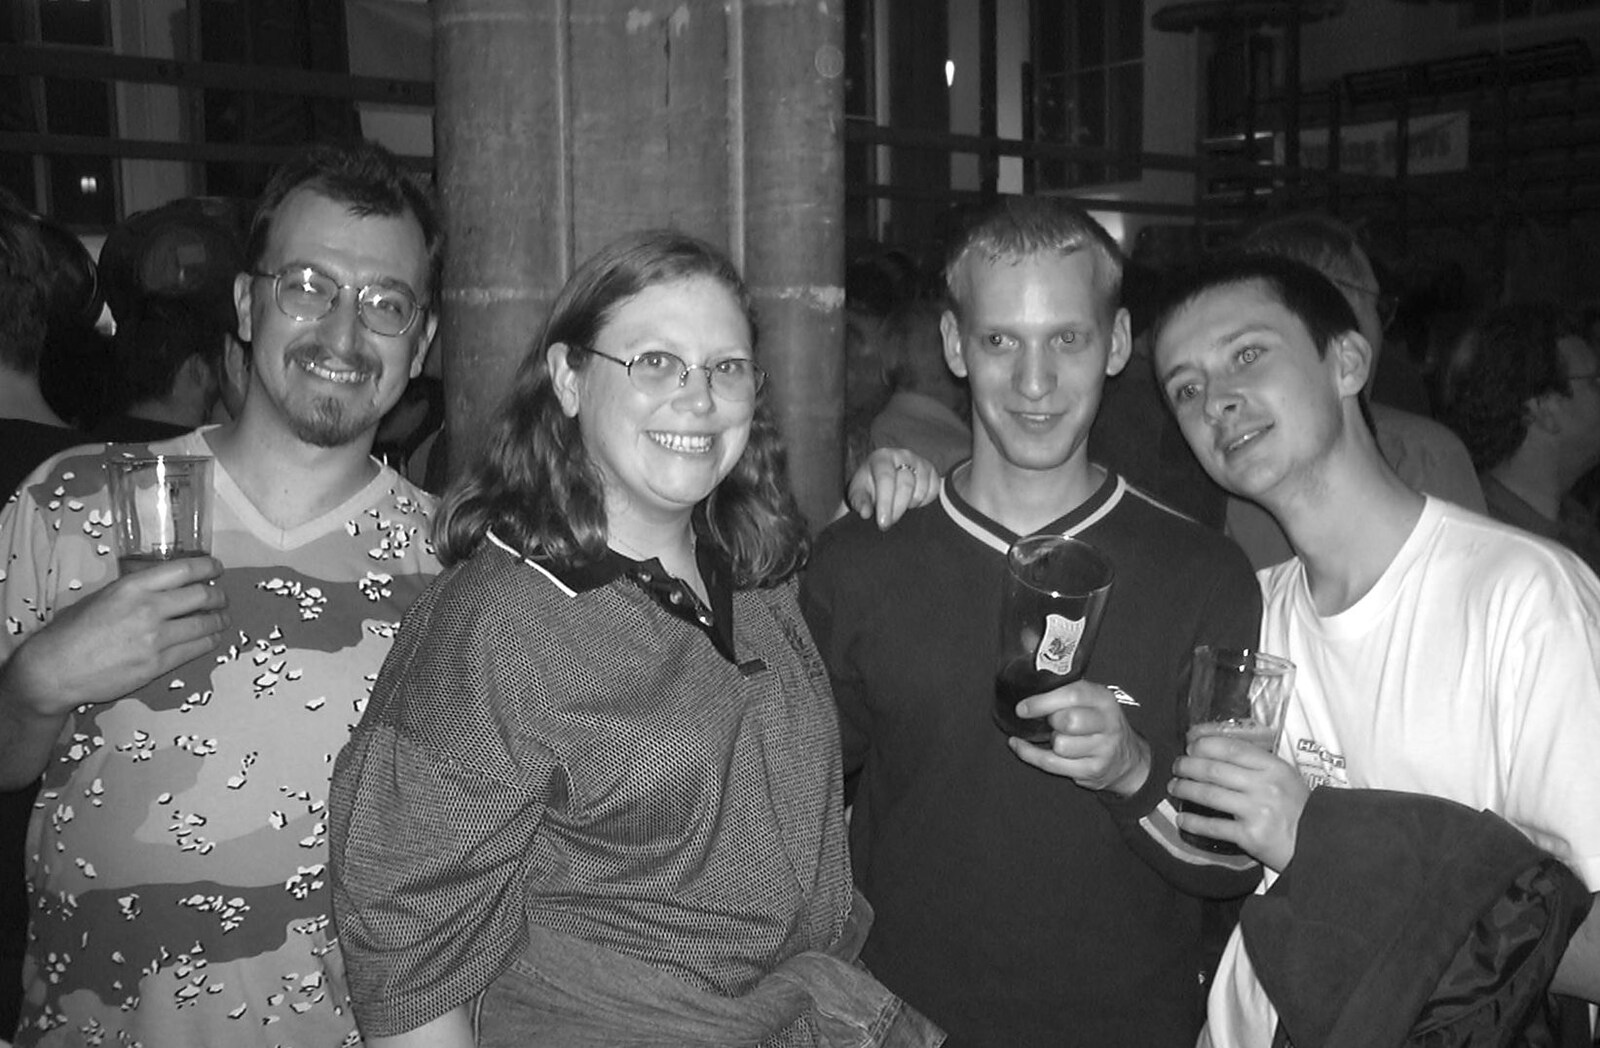 Phil B, Heidi, ? and Andrew from The Norwich Beer Festival, St. Andrew's Hall, Norwich - 24th October 2001